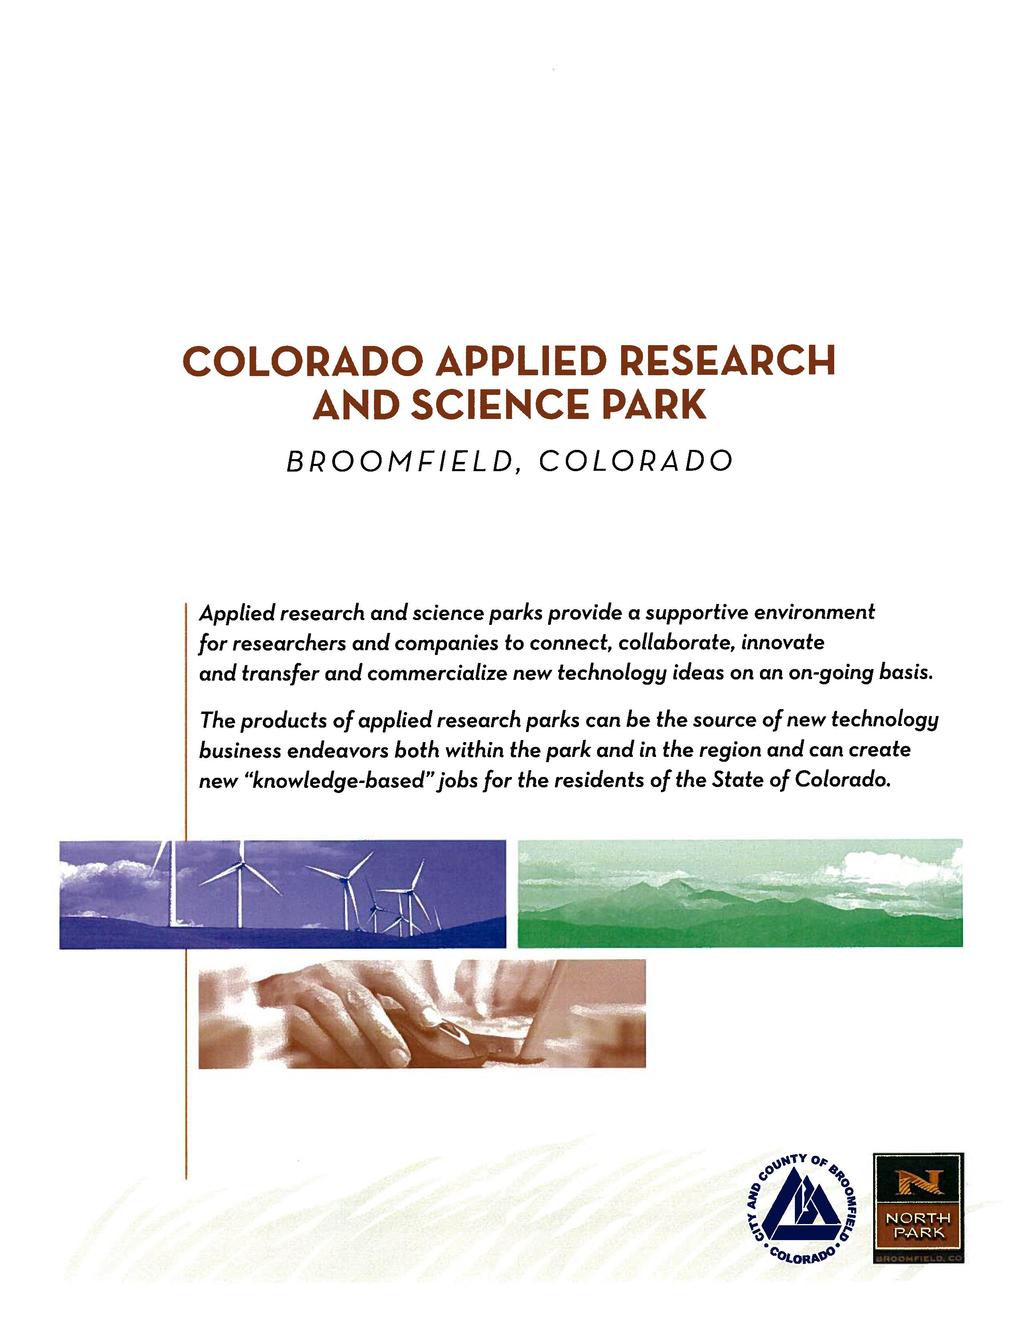 COLORADO APPLIED RESEARCH AND SCIENCE PARK BROOMFIELD, COLORADO Applied research and science parks provide a supportive environment for researchers and companies to connect, collaborate, innovate and